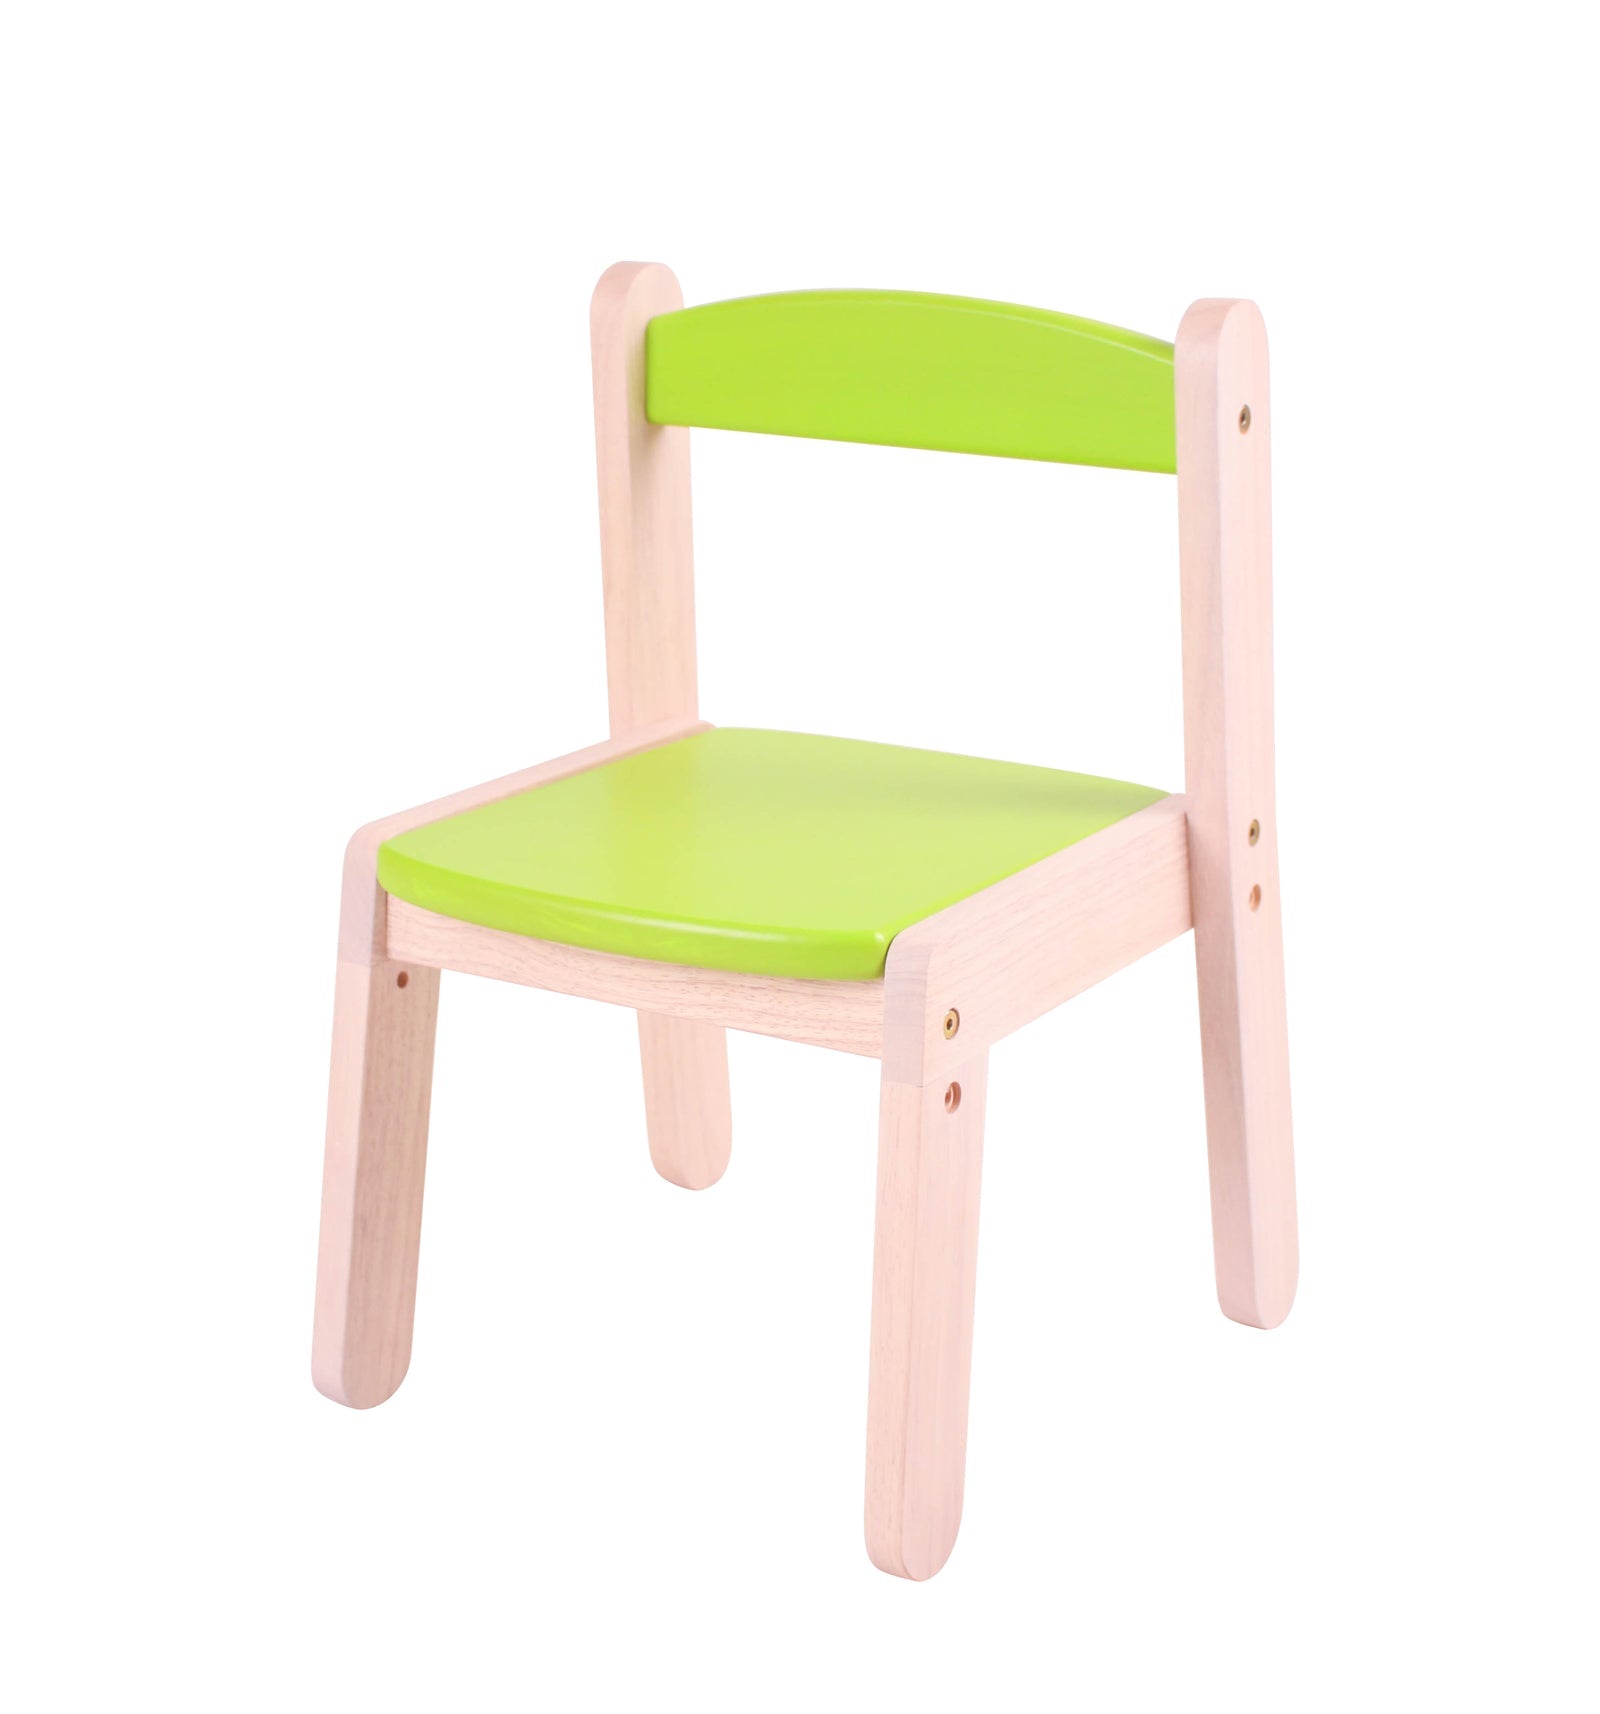 Kid's Wooden Table and Chair Set (1 chair)